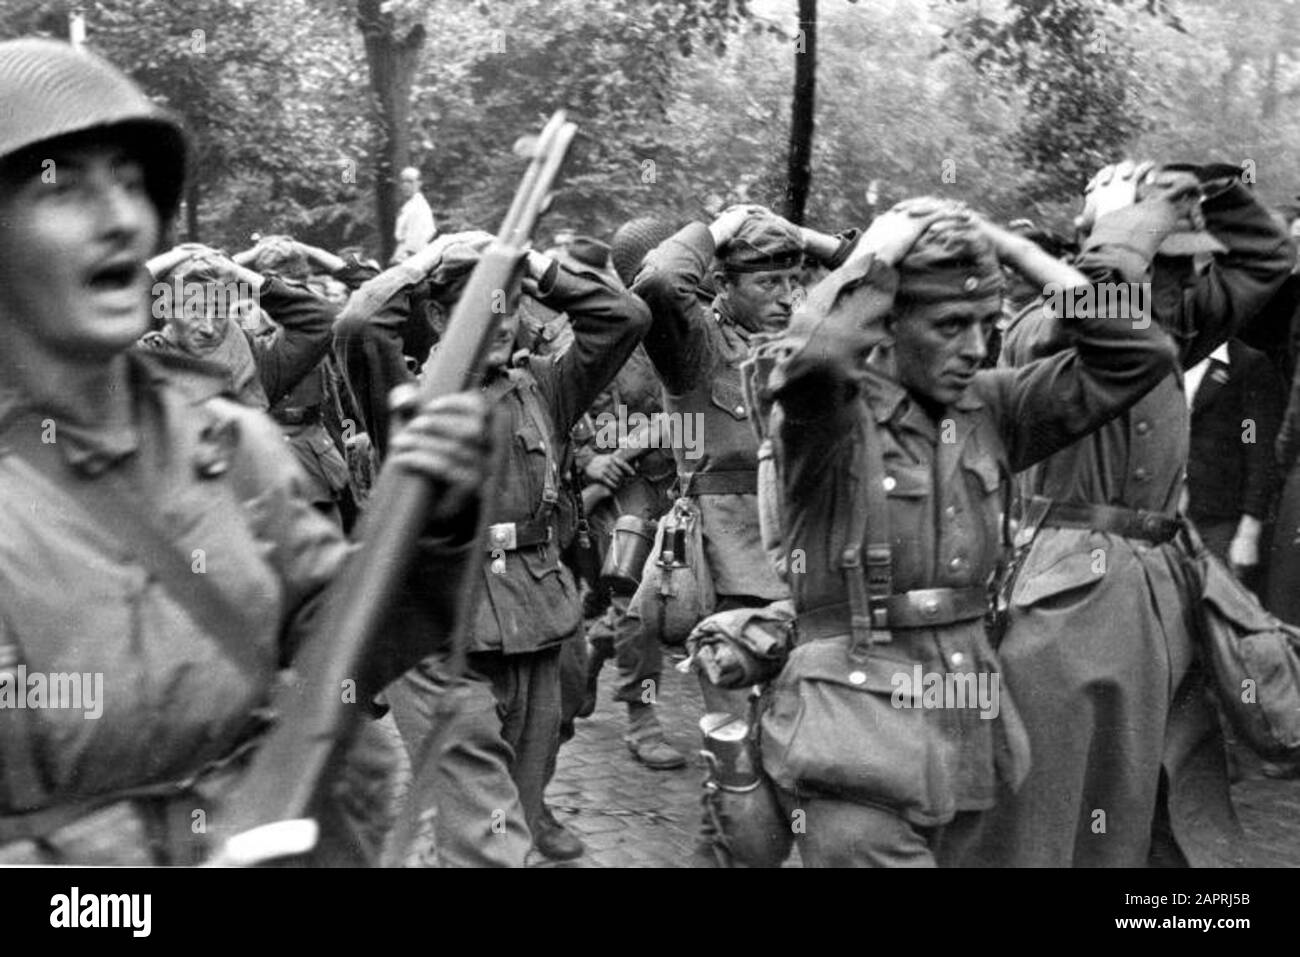 World War II. German soldiers are captured by American soldiers during the liberation of Maastricht. The Netherlands, Maastricht, 15 September 1944. Stock Photo